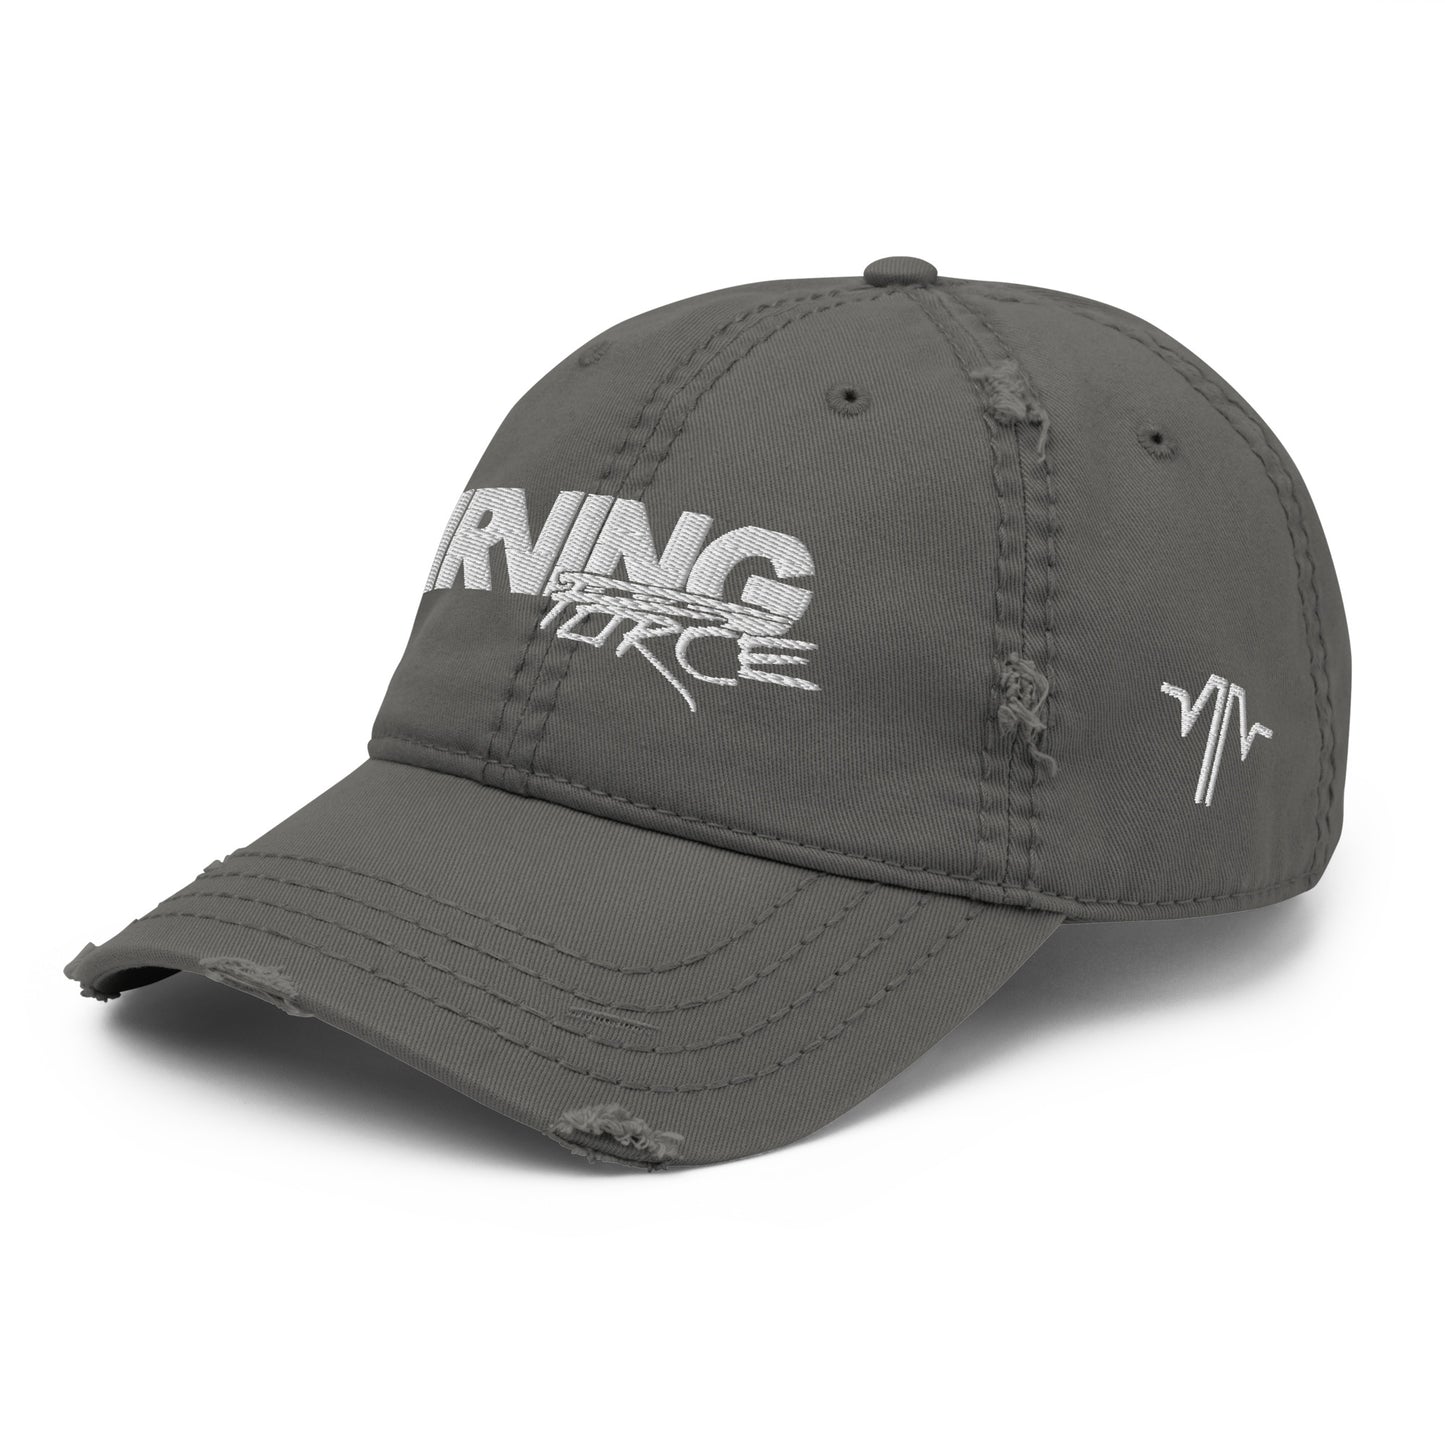 Distressed Dad Hat with IF logo